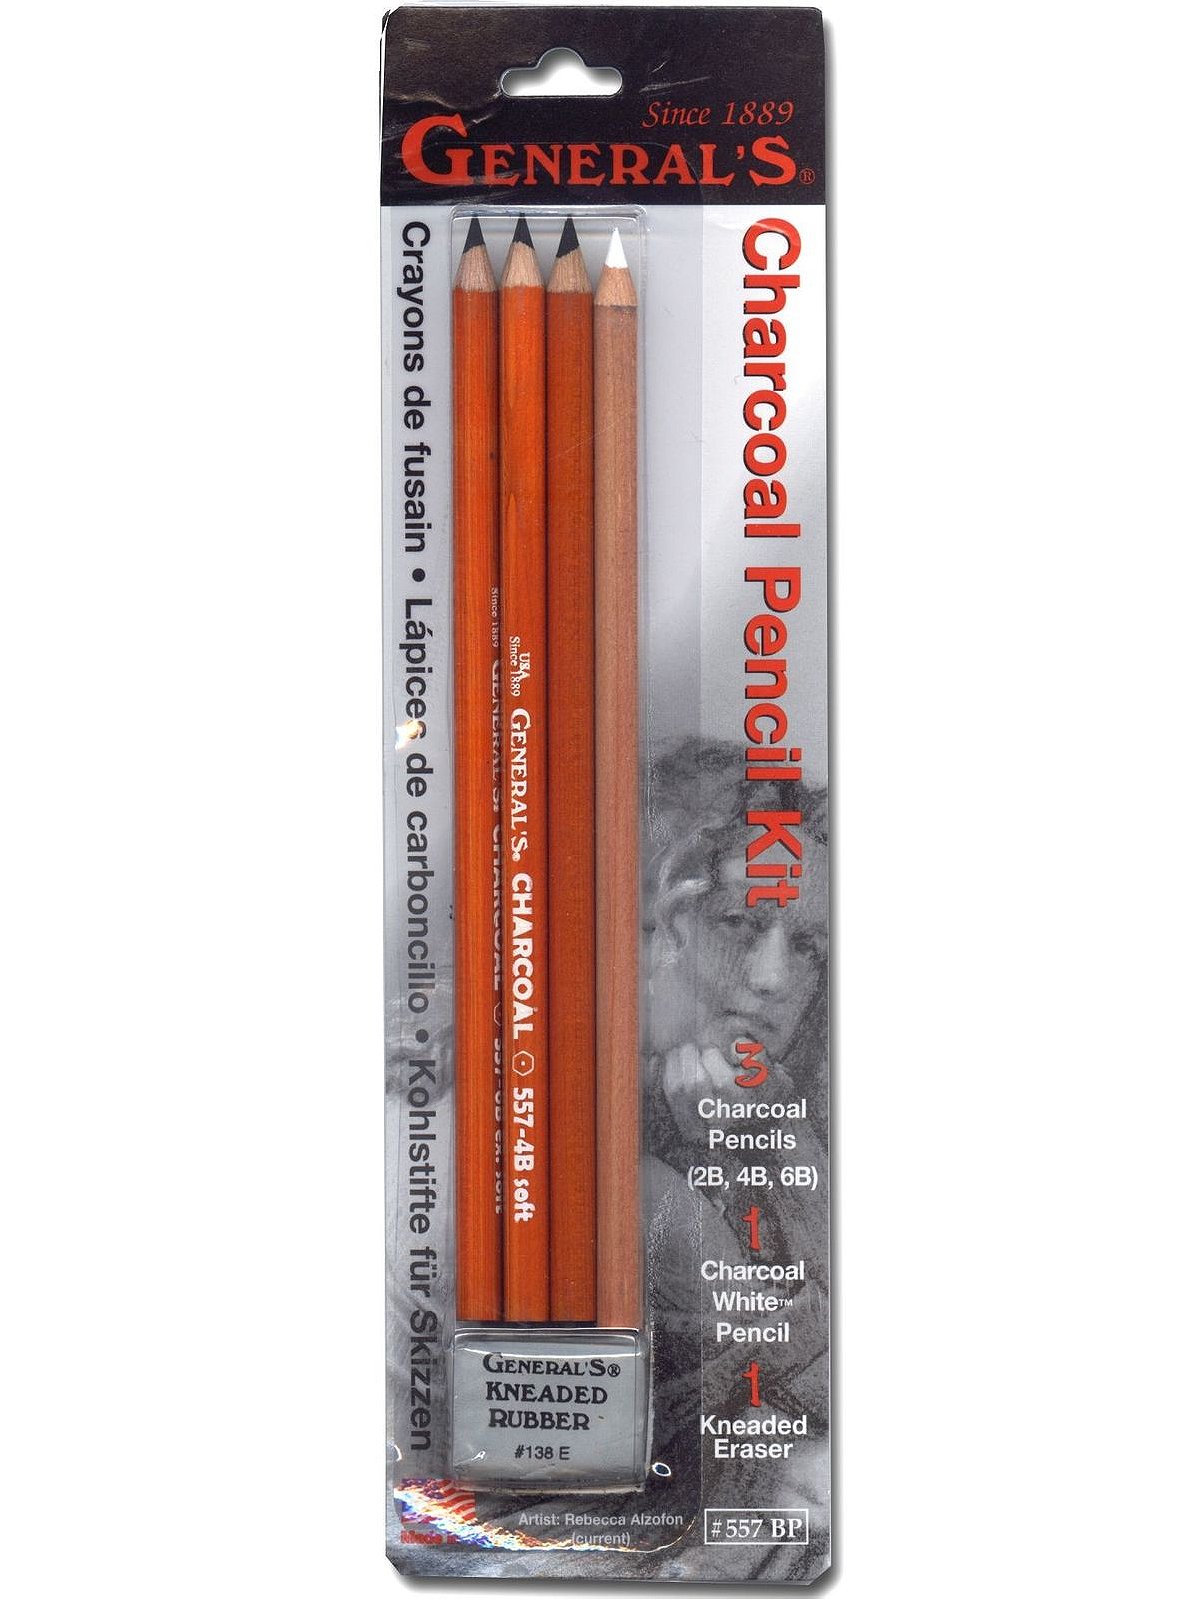 General's Charcoal Pencil Kit – ARCH Art Supplies